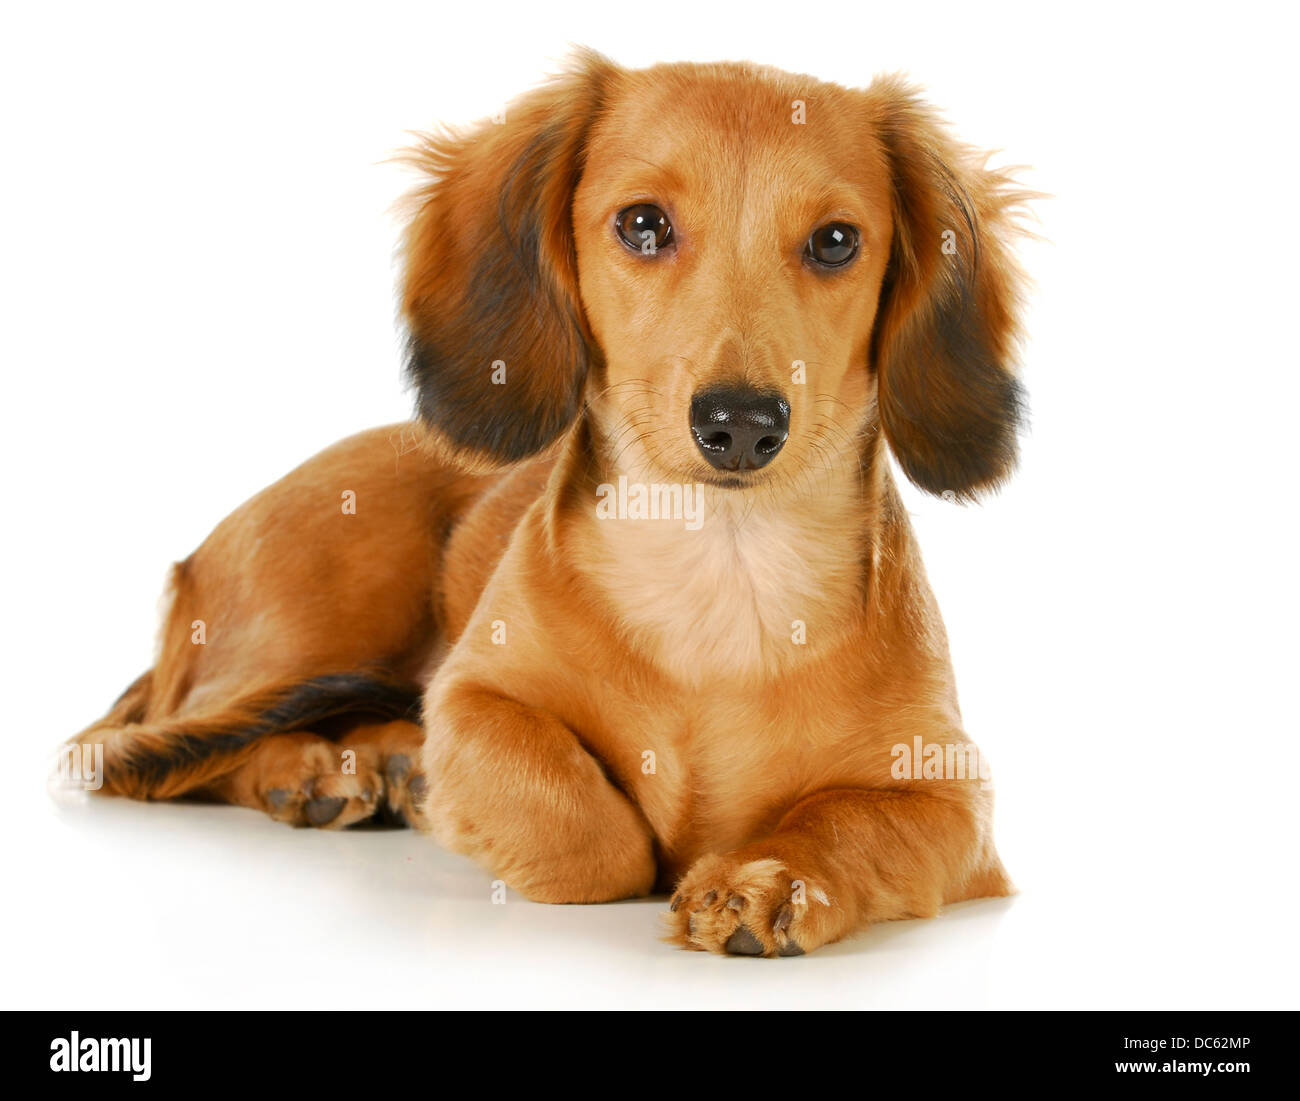 miniature dachshund - long haired weiner dog laying down looking at viewer isolated on white background Stock Photo